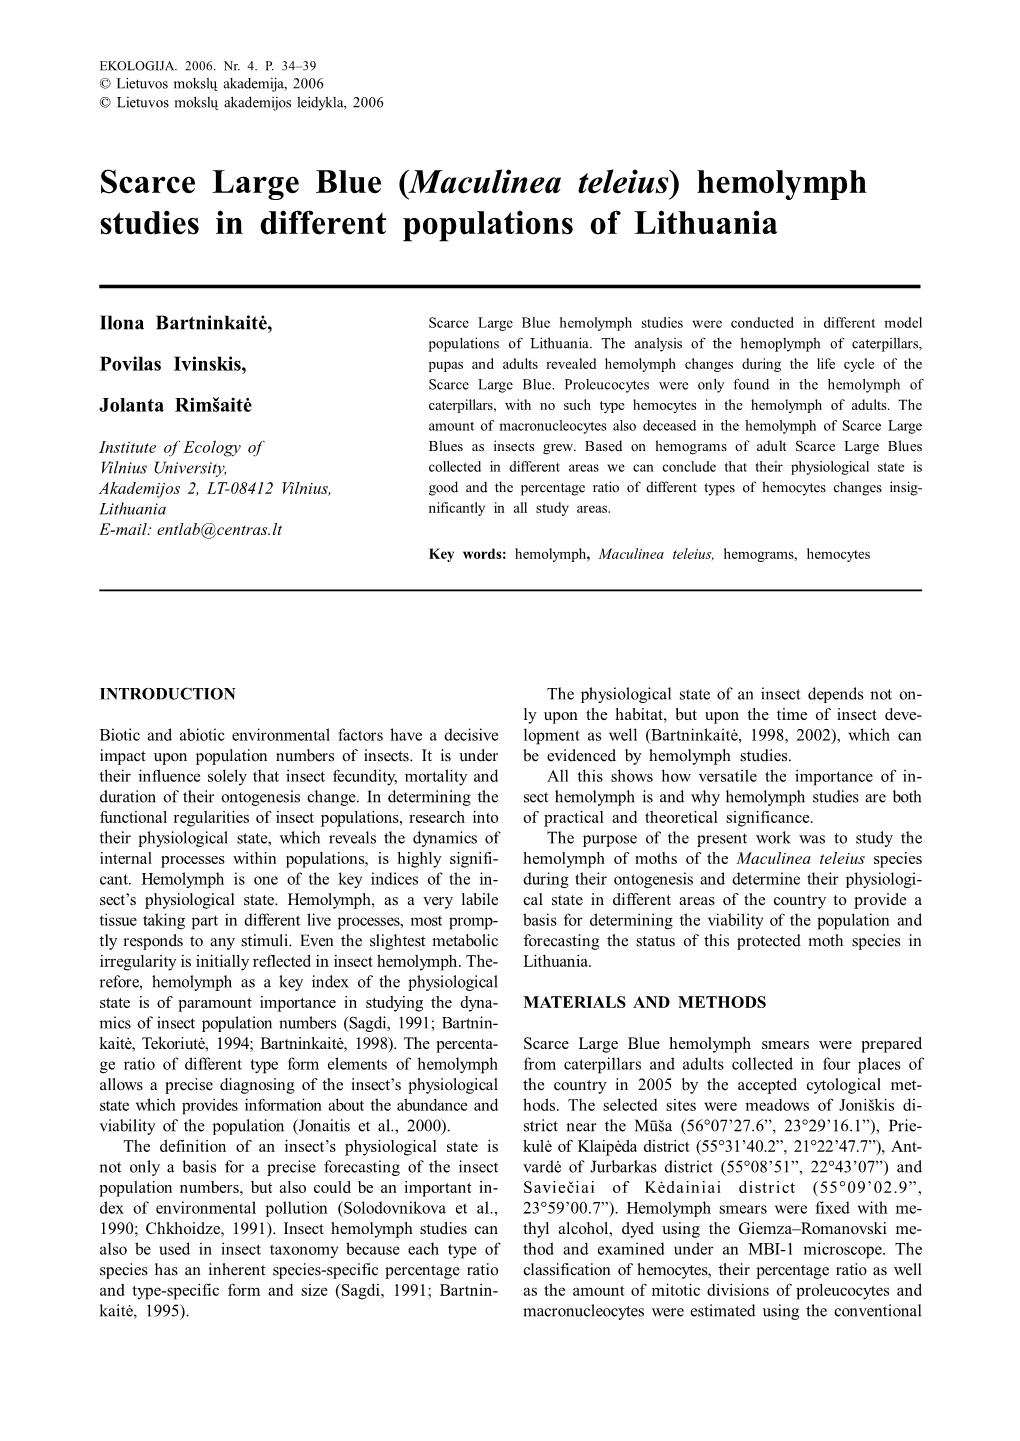 (Maculinea Teleius) Hemolymph Studies in Different Populations of Lithuania